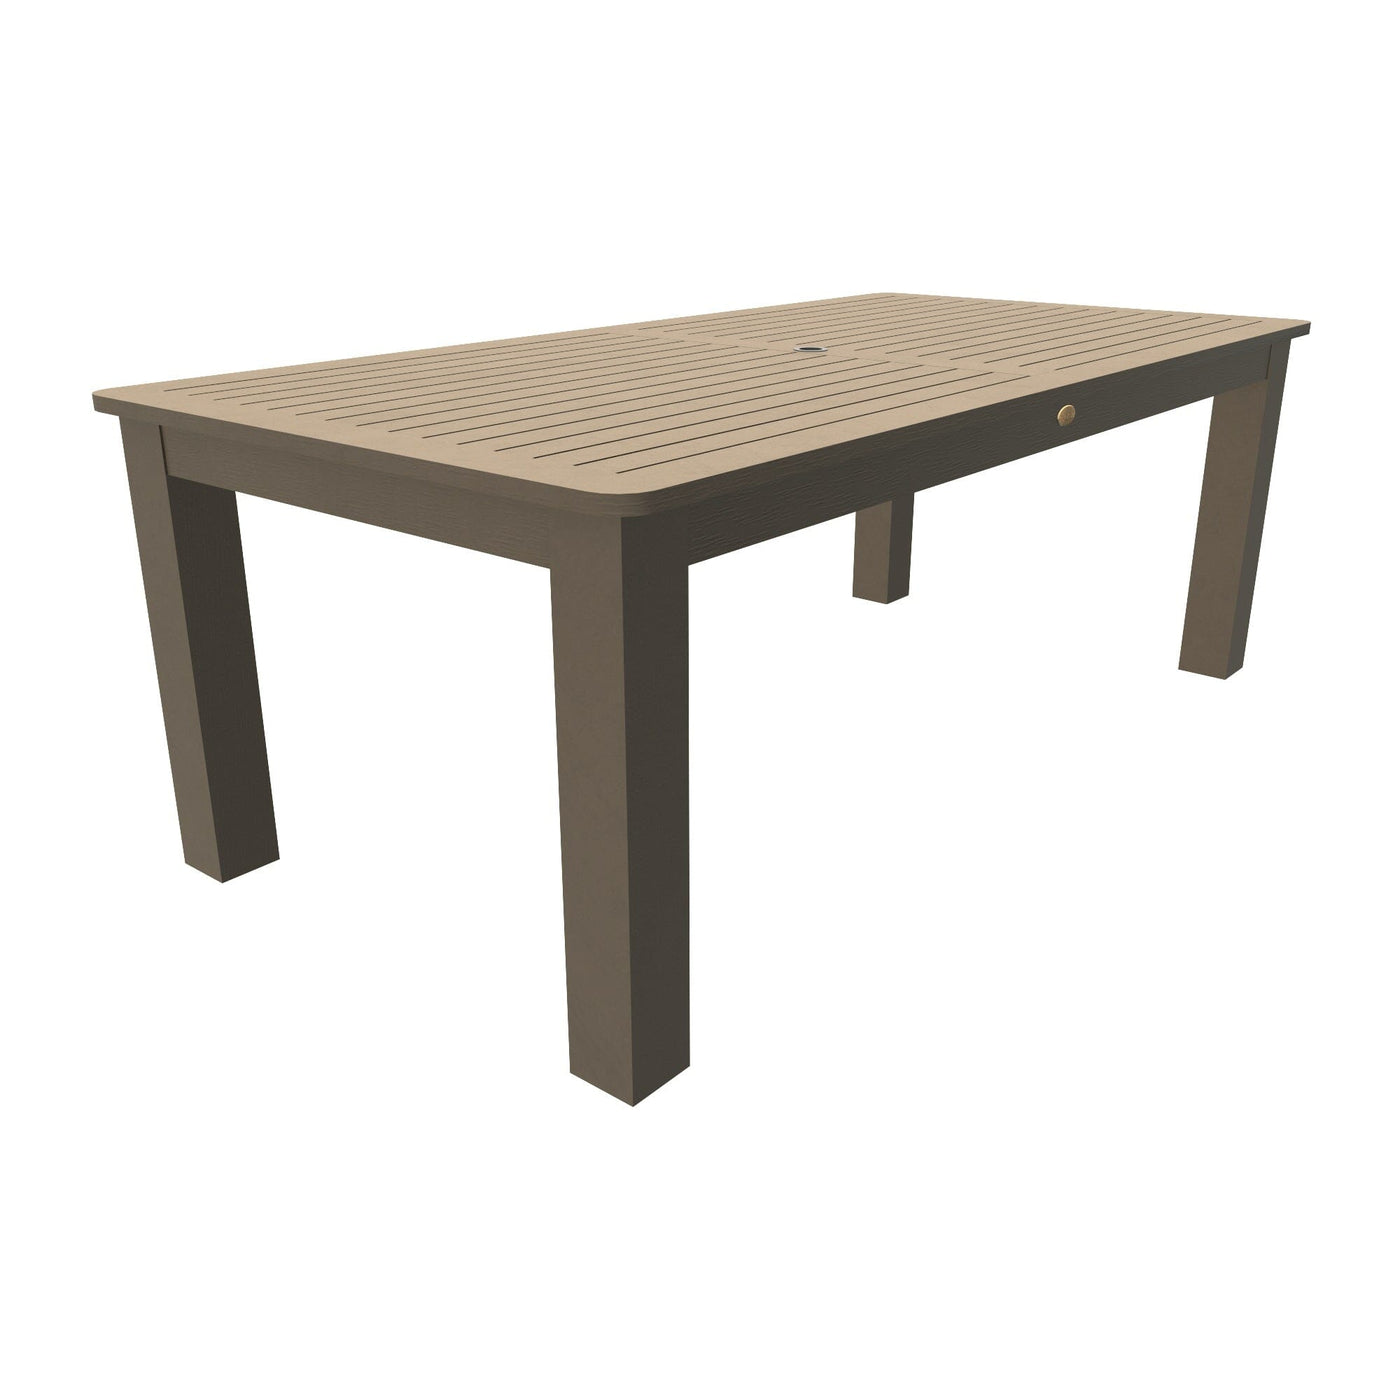 Rectangular 42in x 84in Oversized Dining Table - Counter Height Dining Highwood USA Woodland Brown 